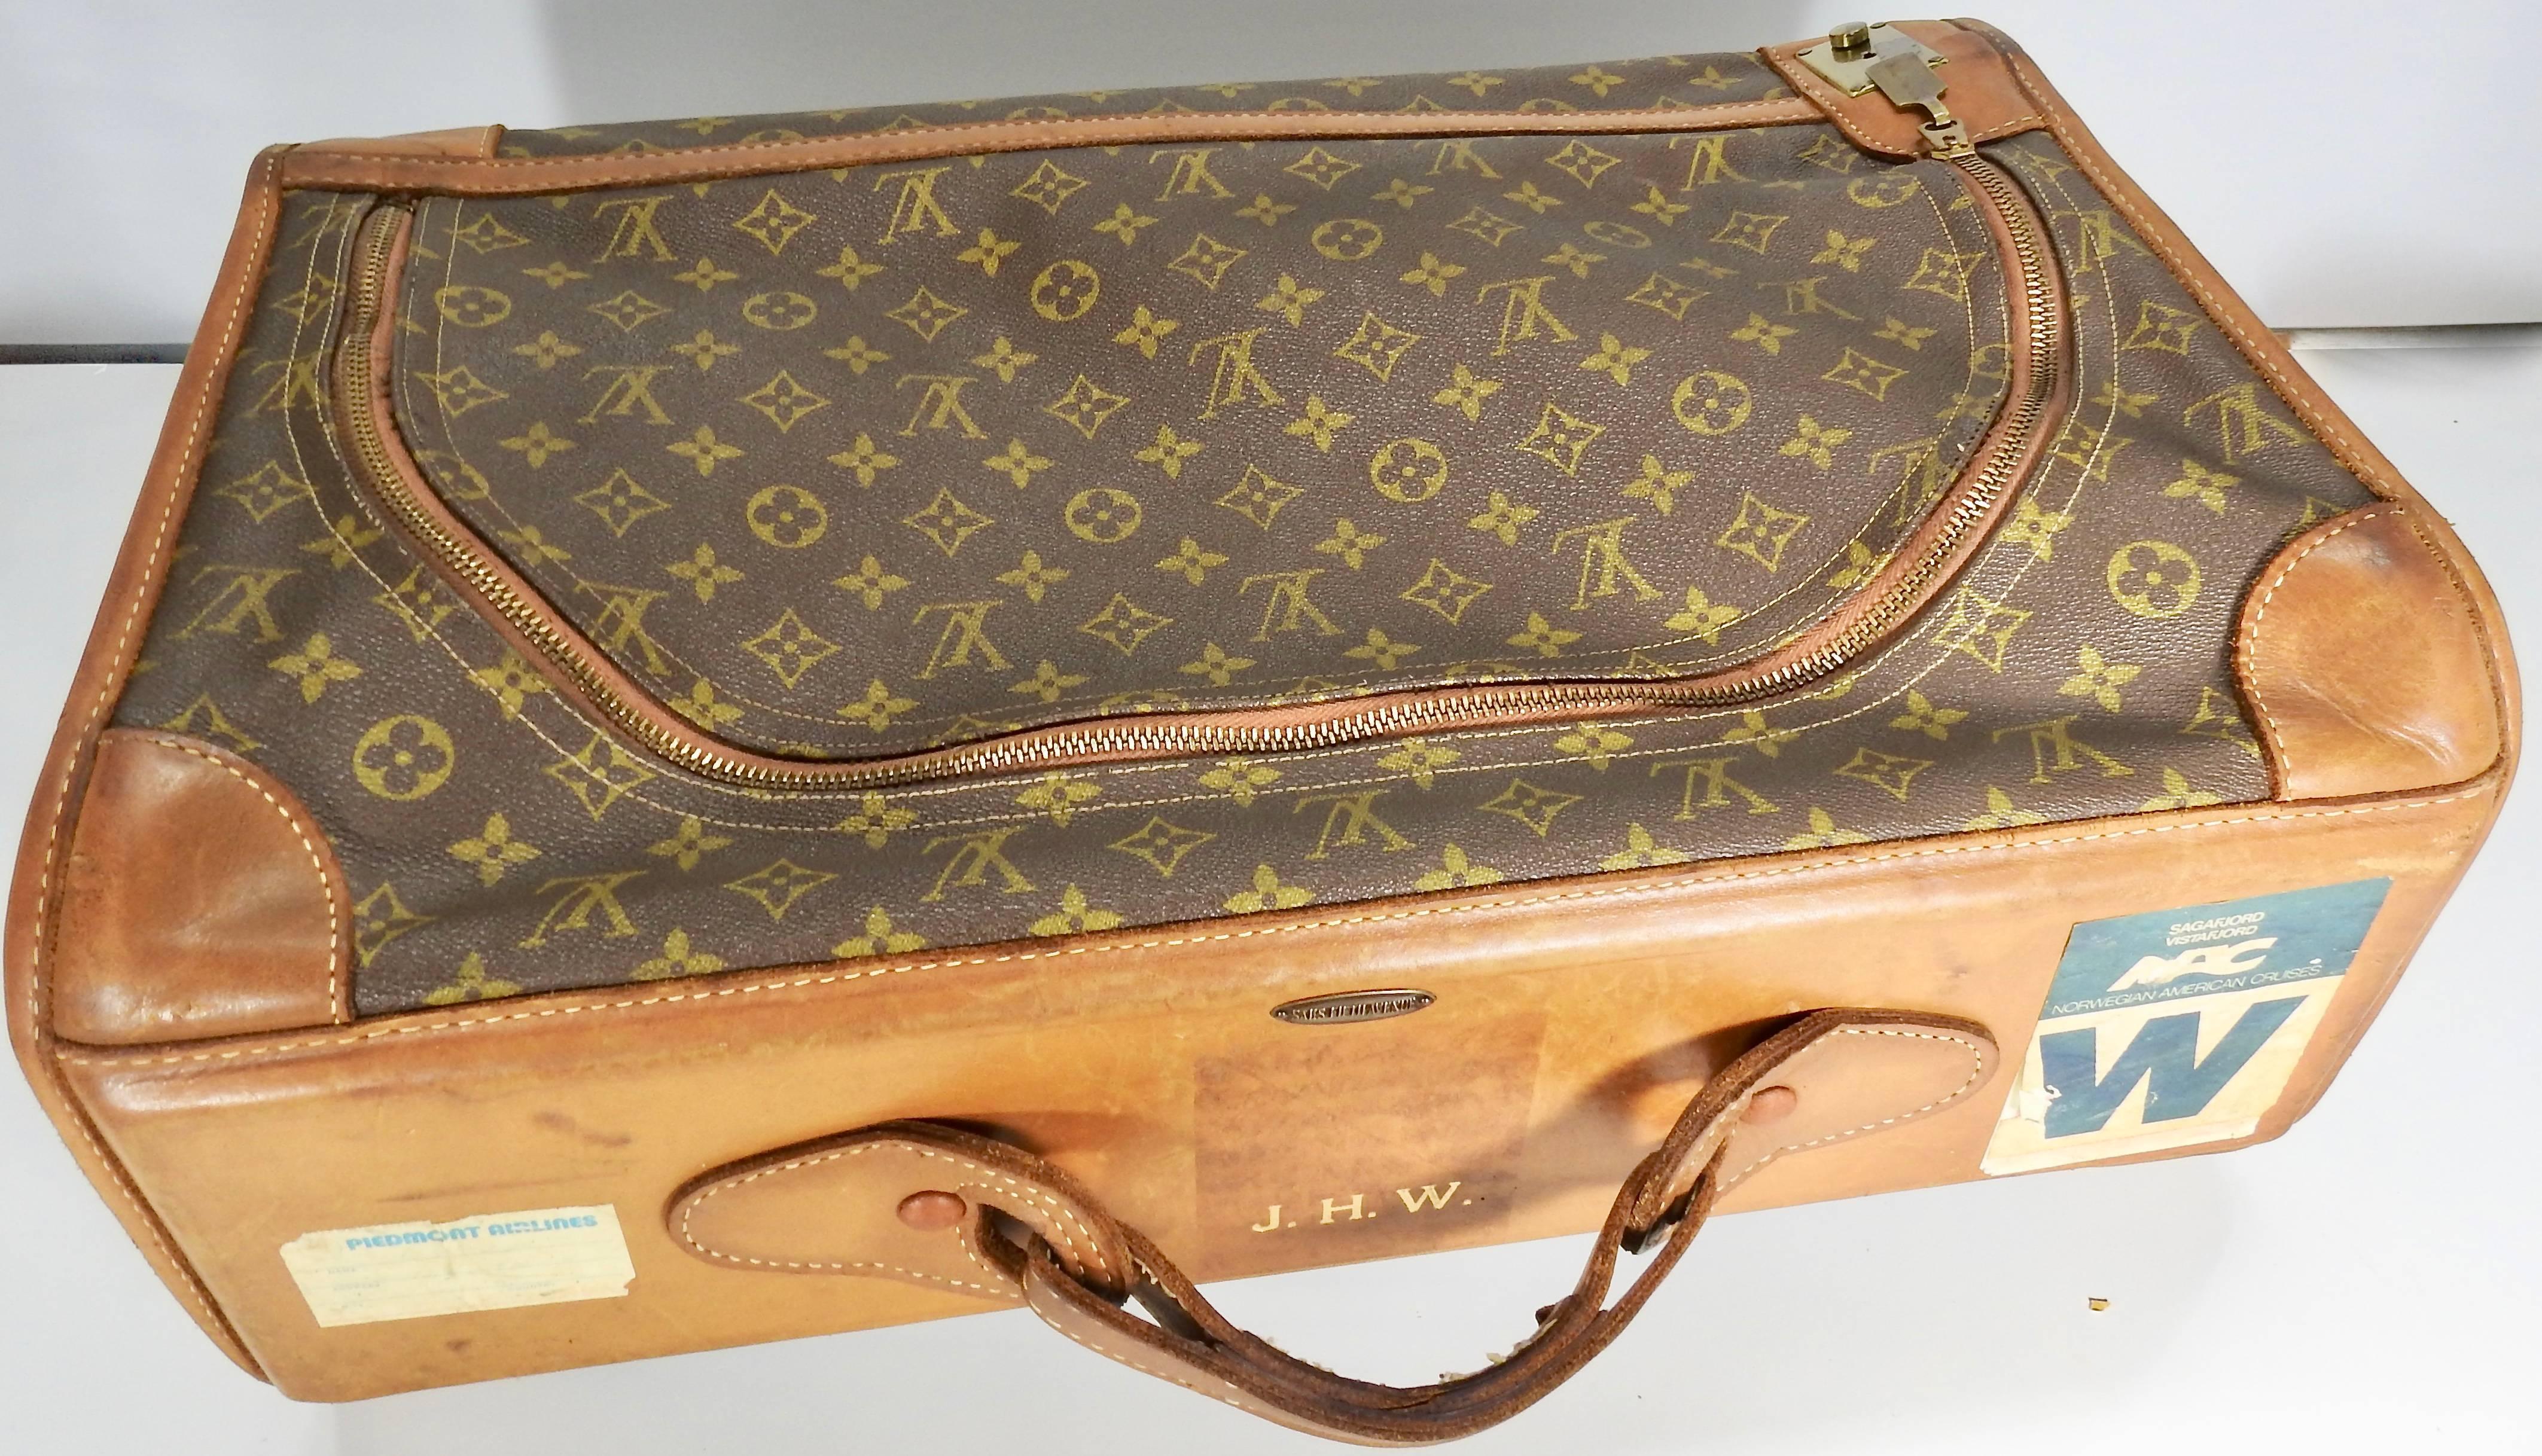 We are offering a Classic Louis Vuitton soft overnight case. It has the initials J.H.W. along with a metal tag from Saks Fifth Avenue. It features a leather designer handle. The bag has a full length zipper with a key lock with a key. The brown